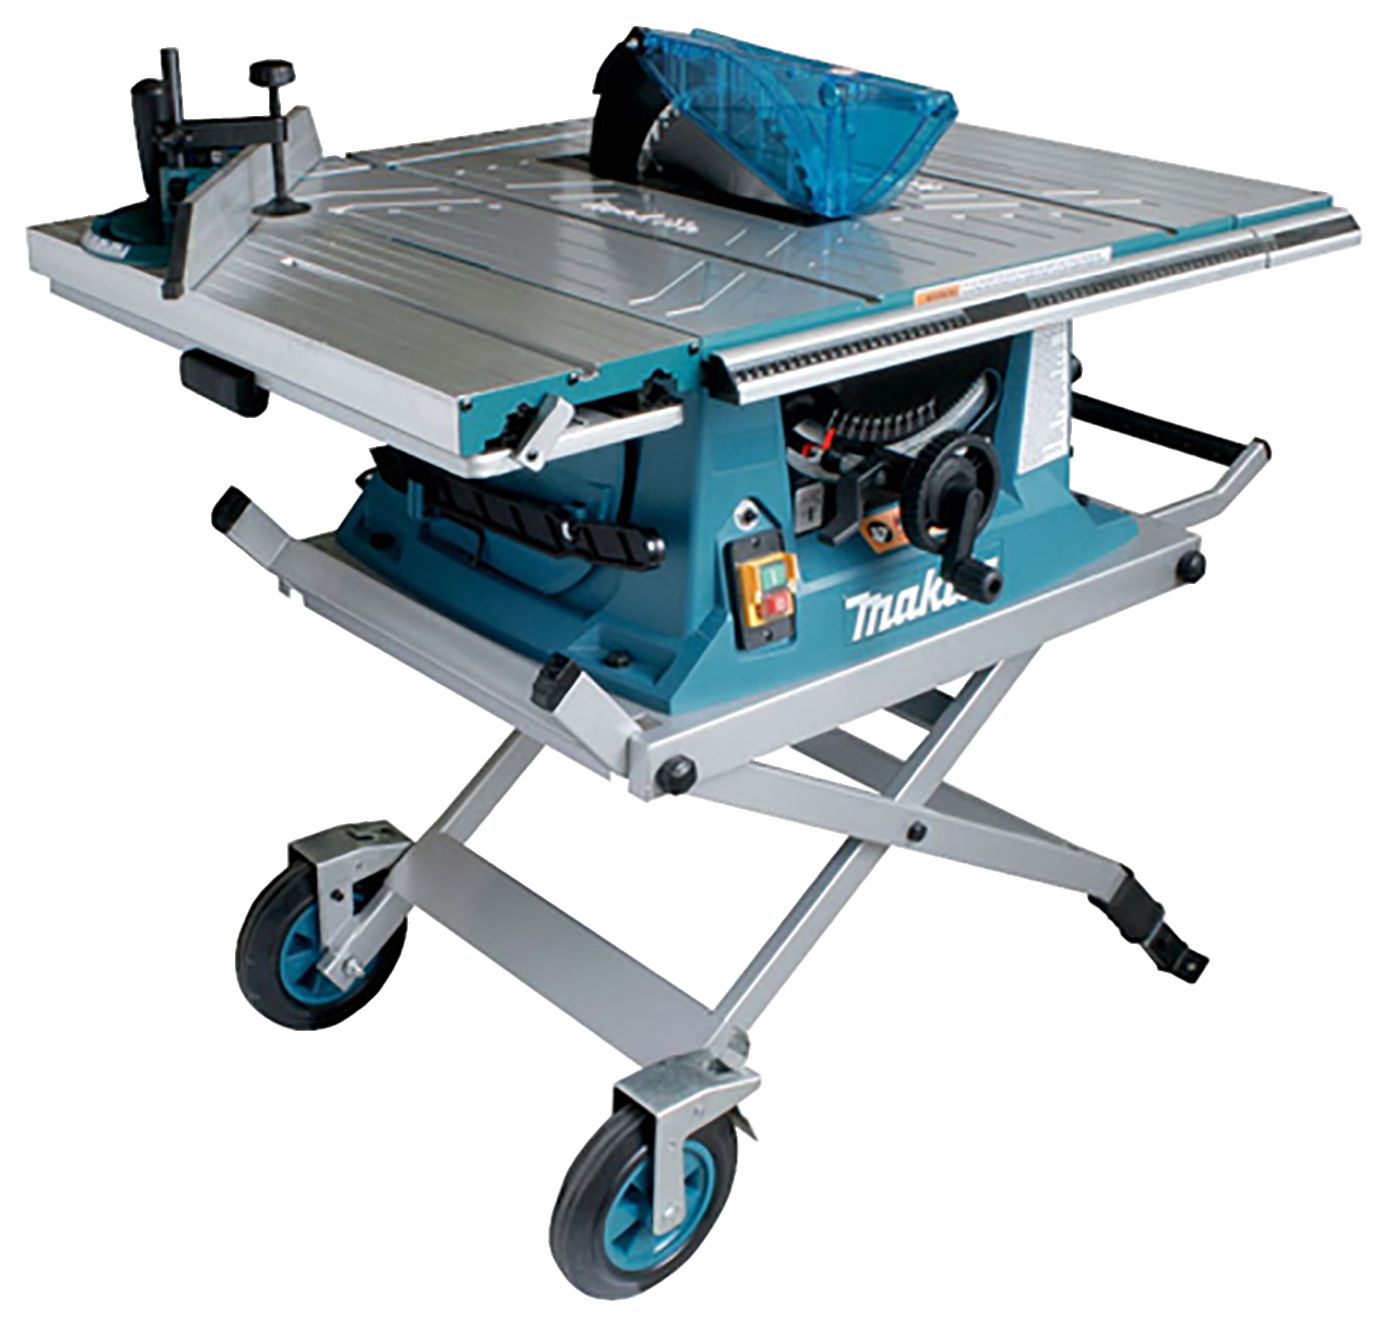 Makita MLT100NX1/2 10in Table Saw 240V - 1500W